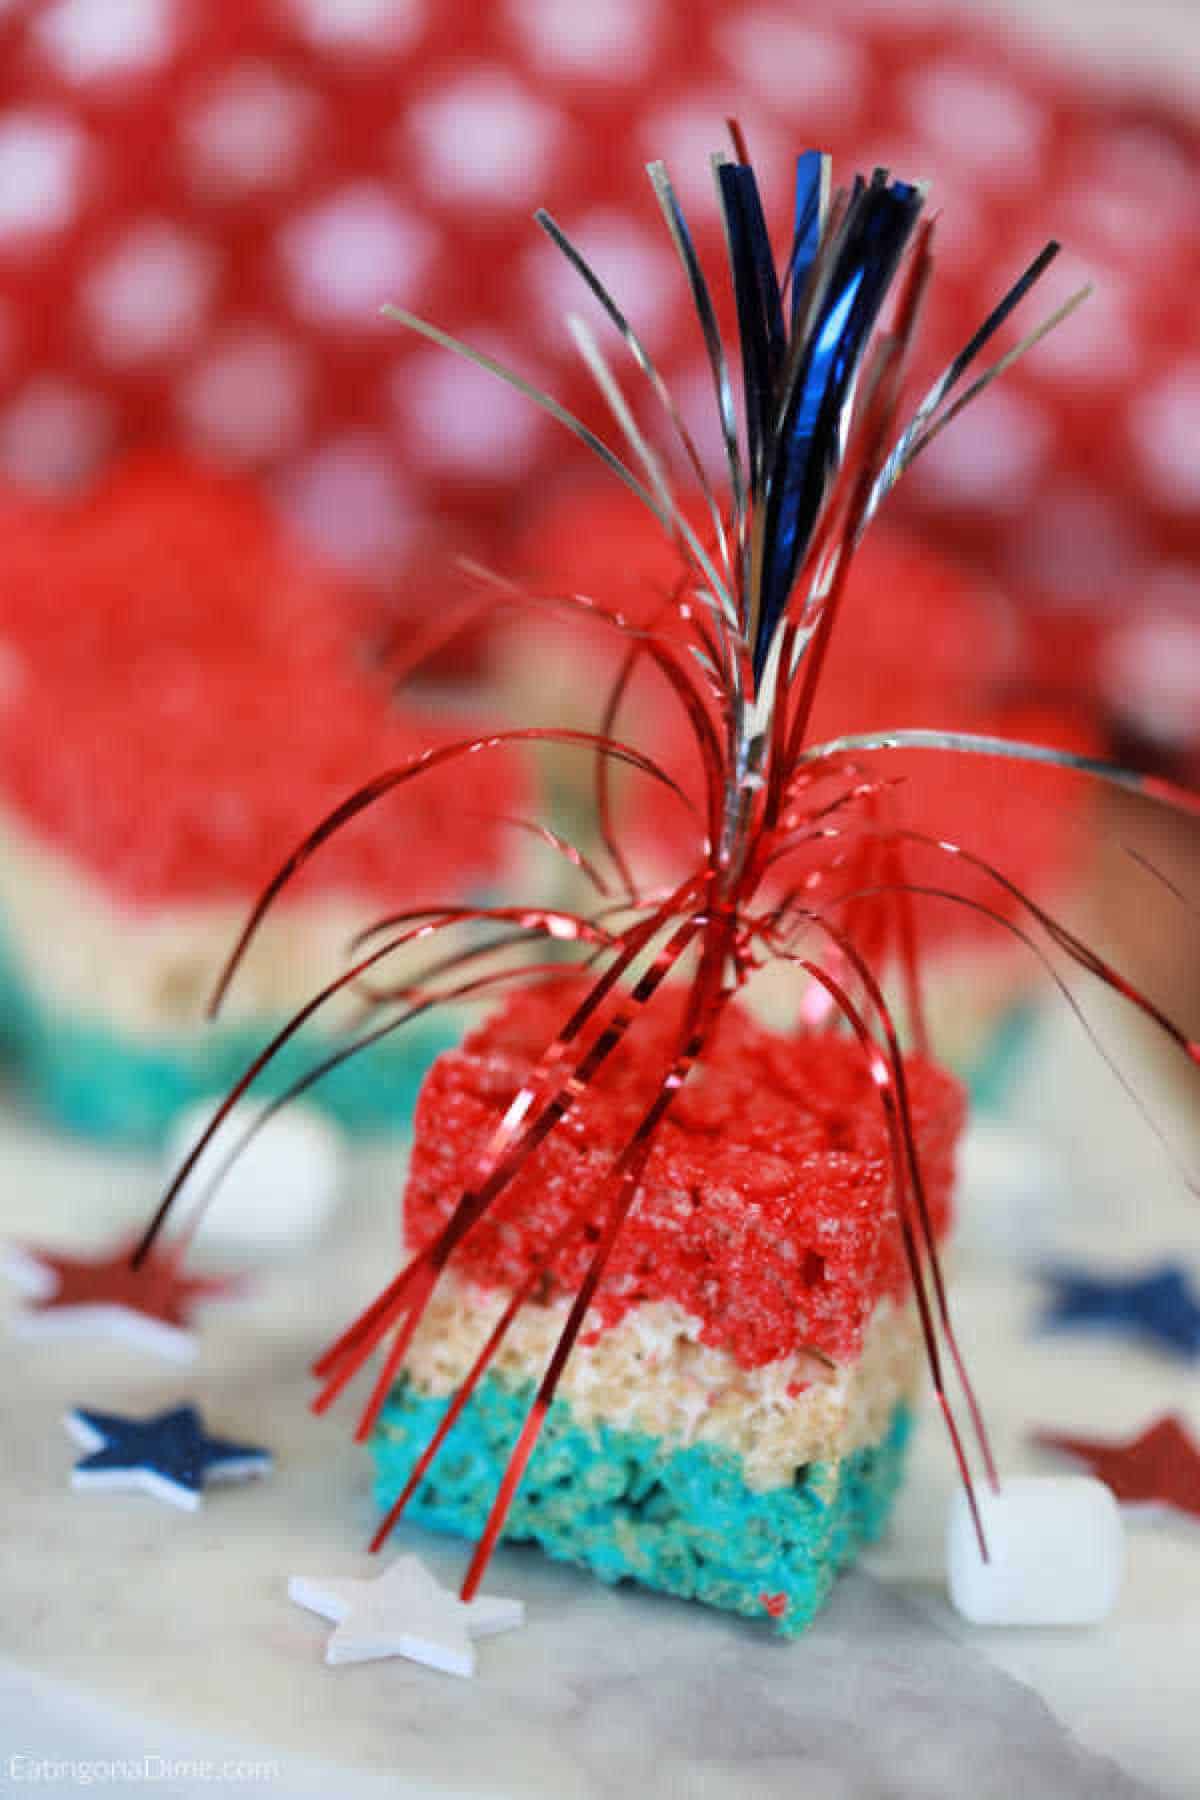 Red White and Blue Rice Krispie Treats cut into square with an red, white and blue party favor stuck into the treat